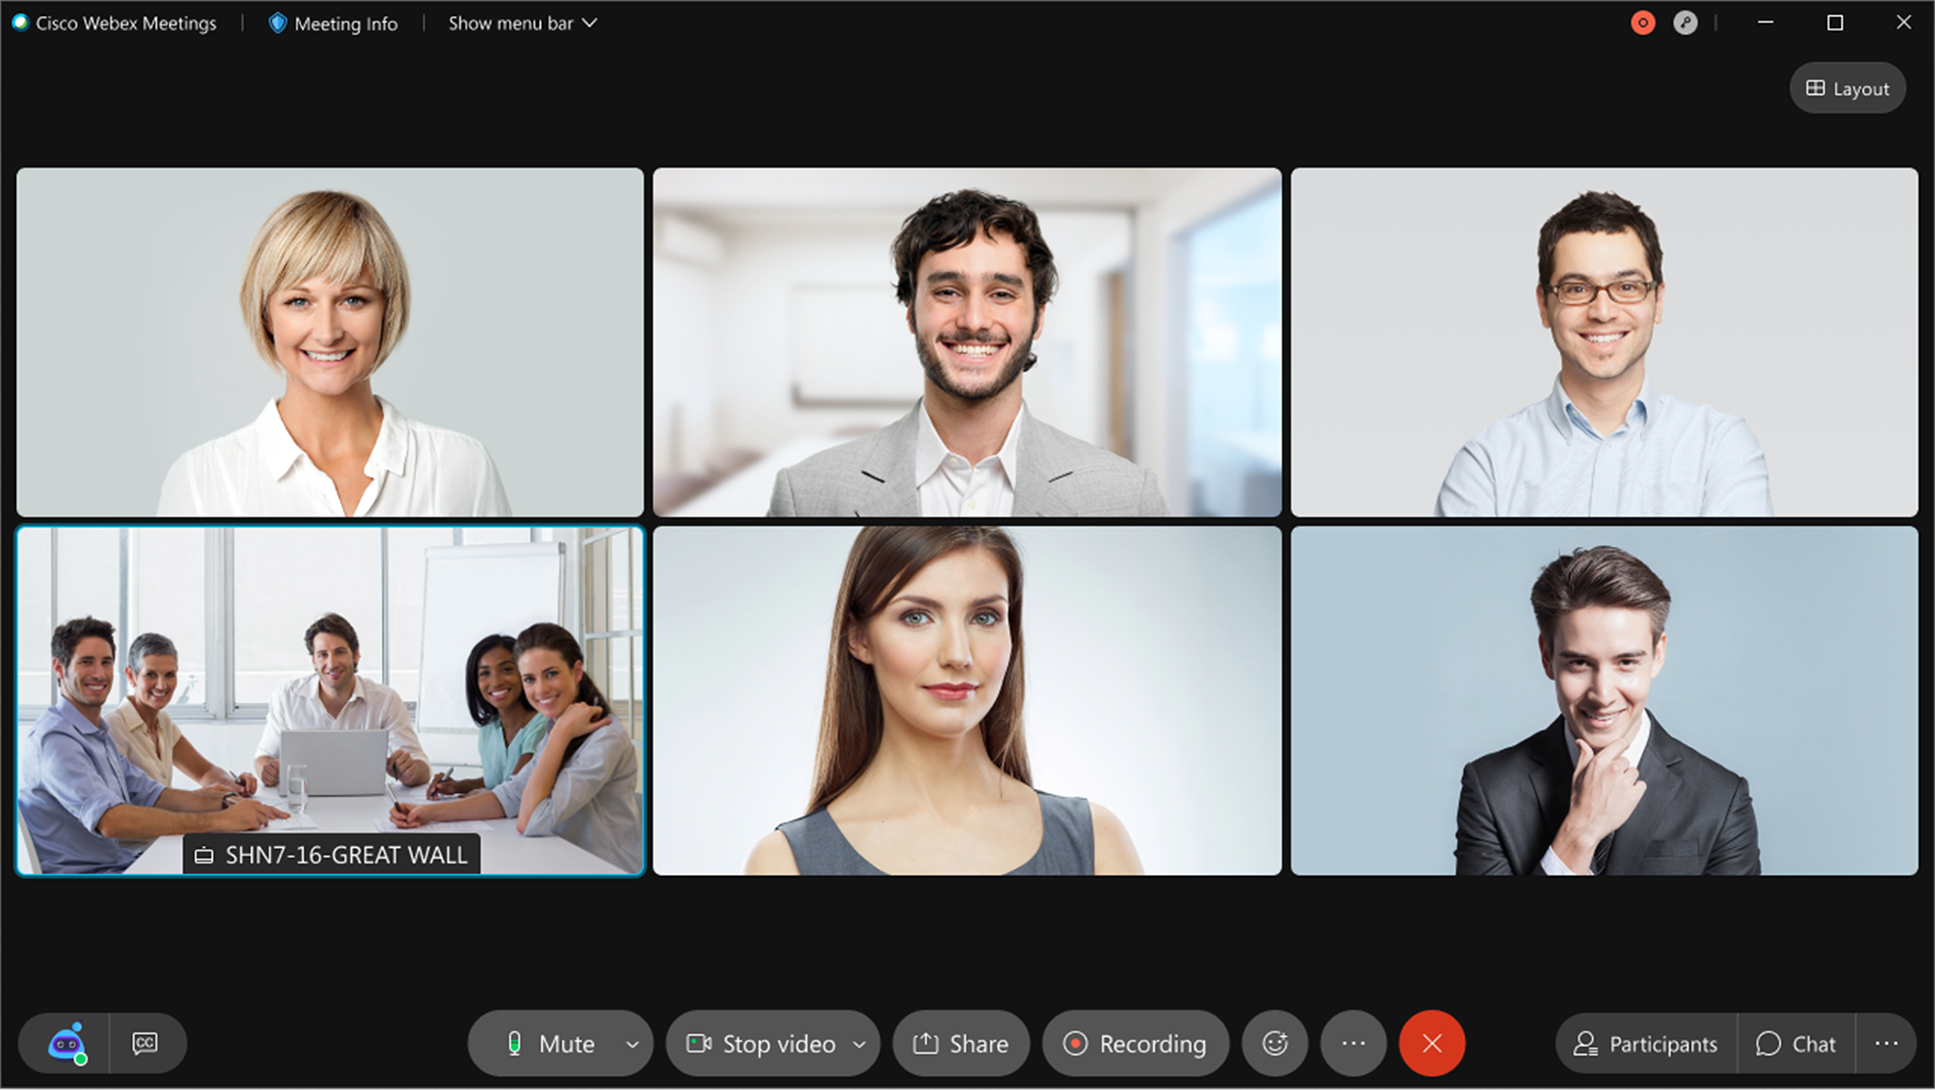 This is the new default layout Webex participants as of WBS 40.8+.